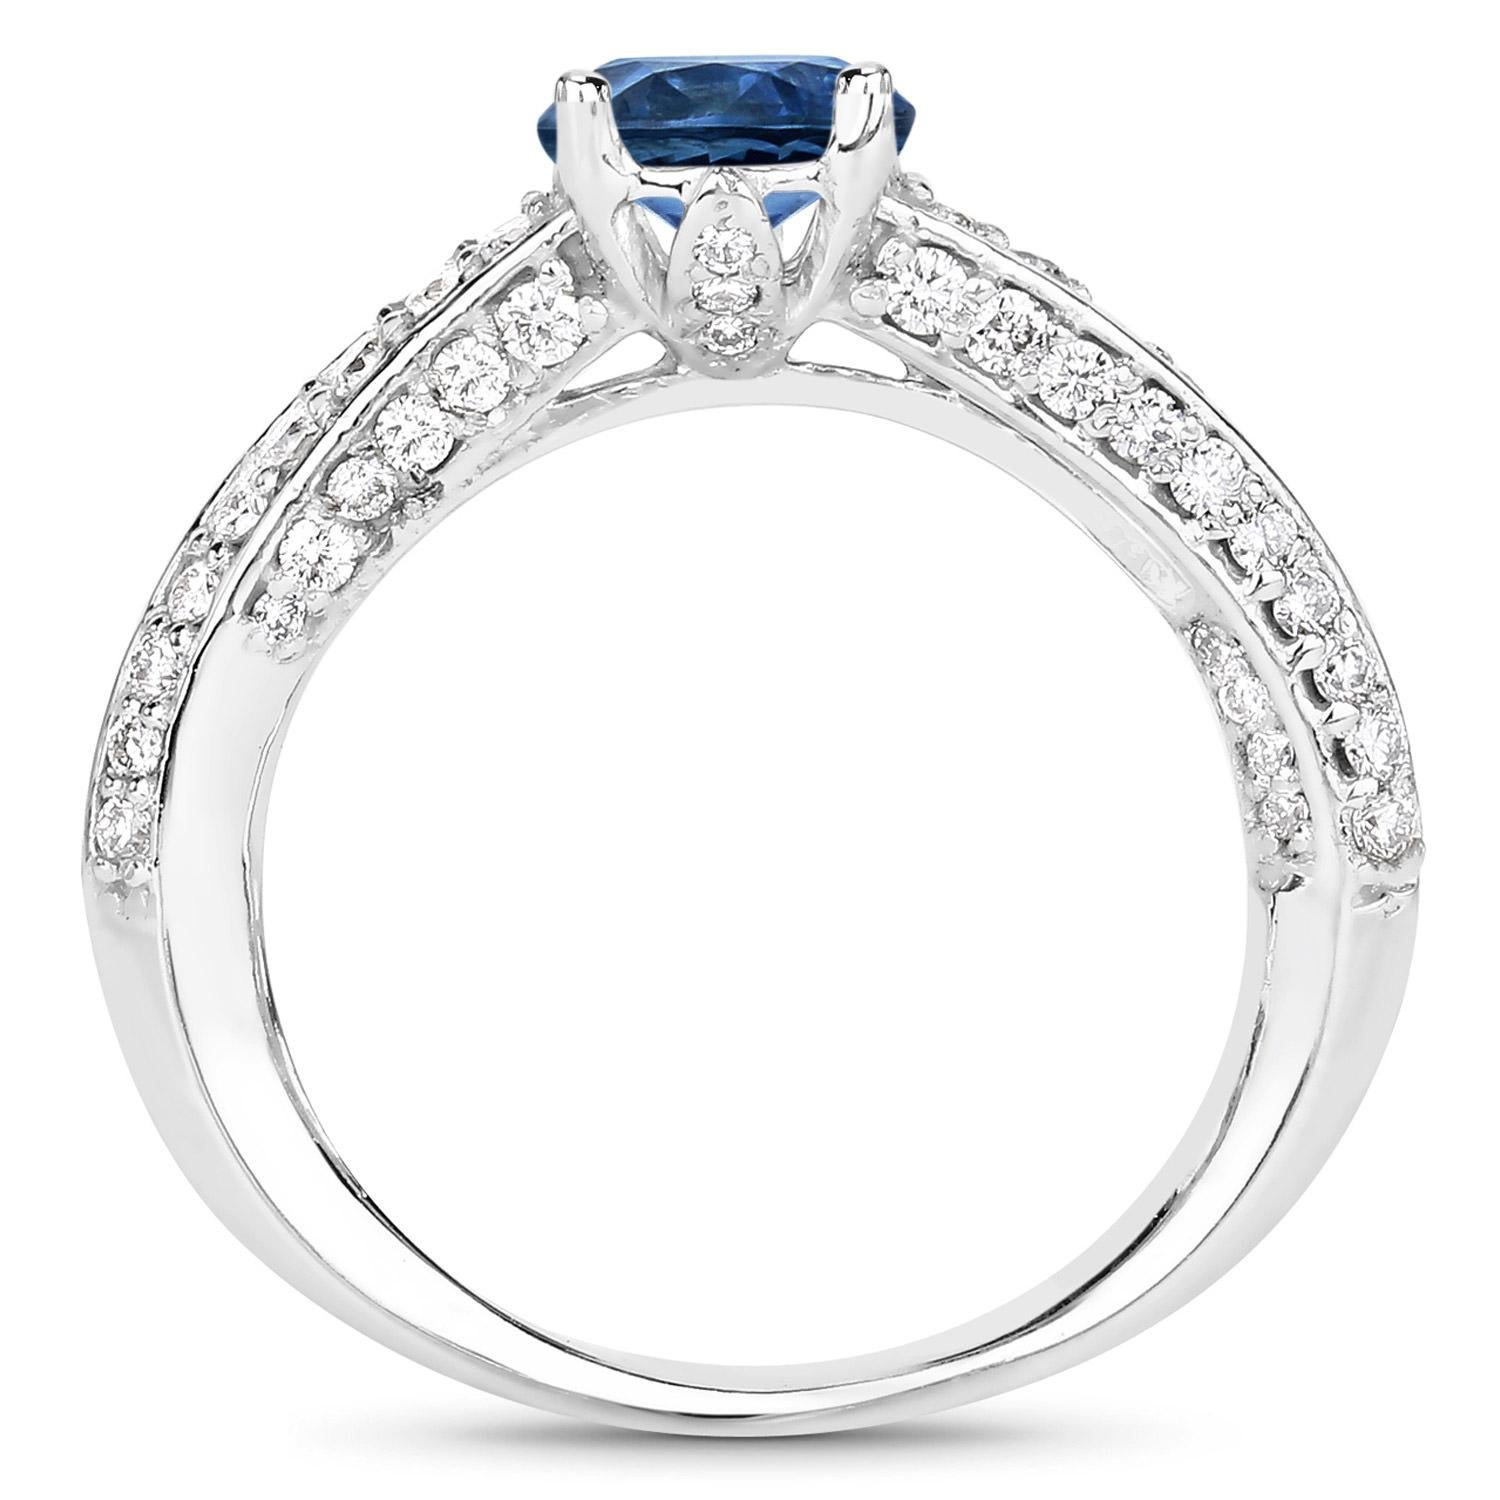 Women's Natural Blue Sapphire & Diamond Cocktail Ring 1.60 Carats Total 14k White Gold For Sale